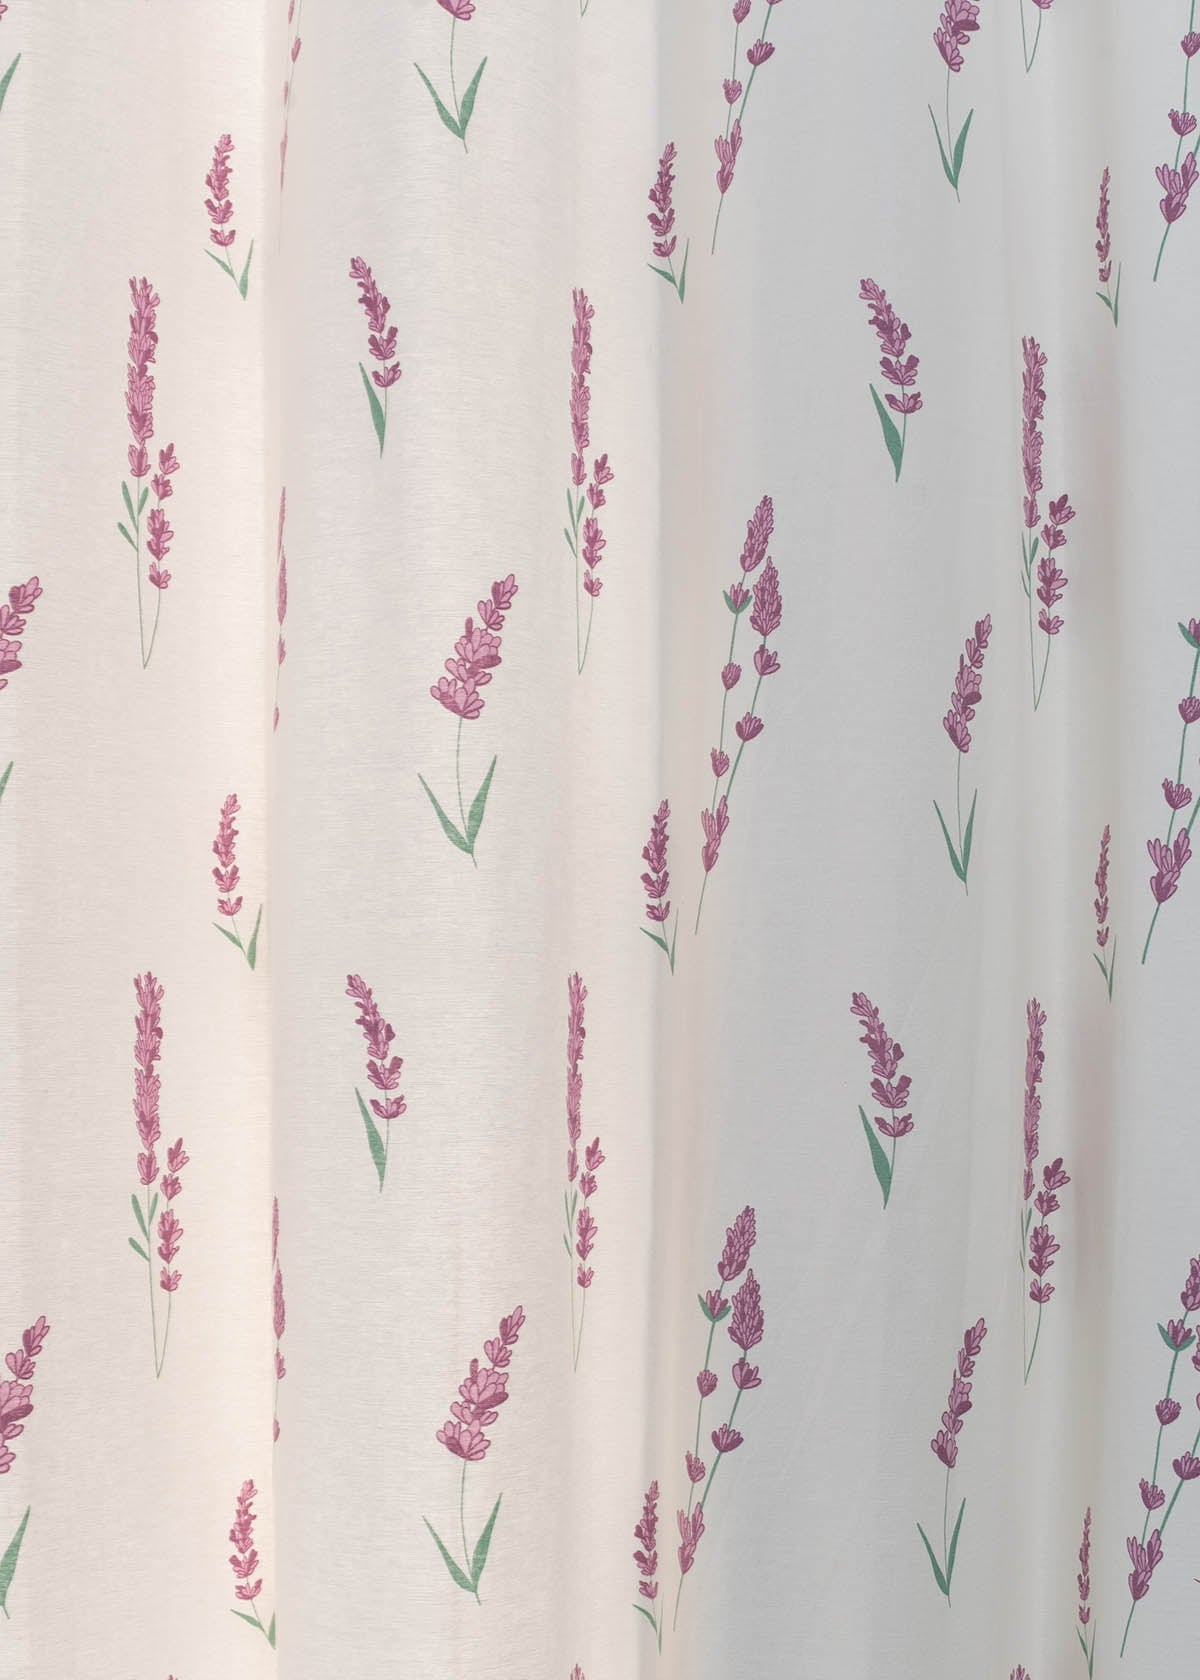 Fields of Lavender 100% cotton floral curtain for kids room - Room darkening -  Lavender - Pack of 1